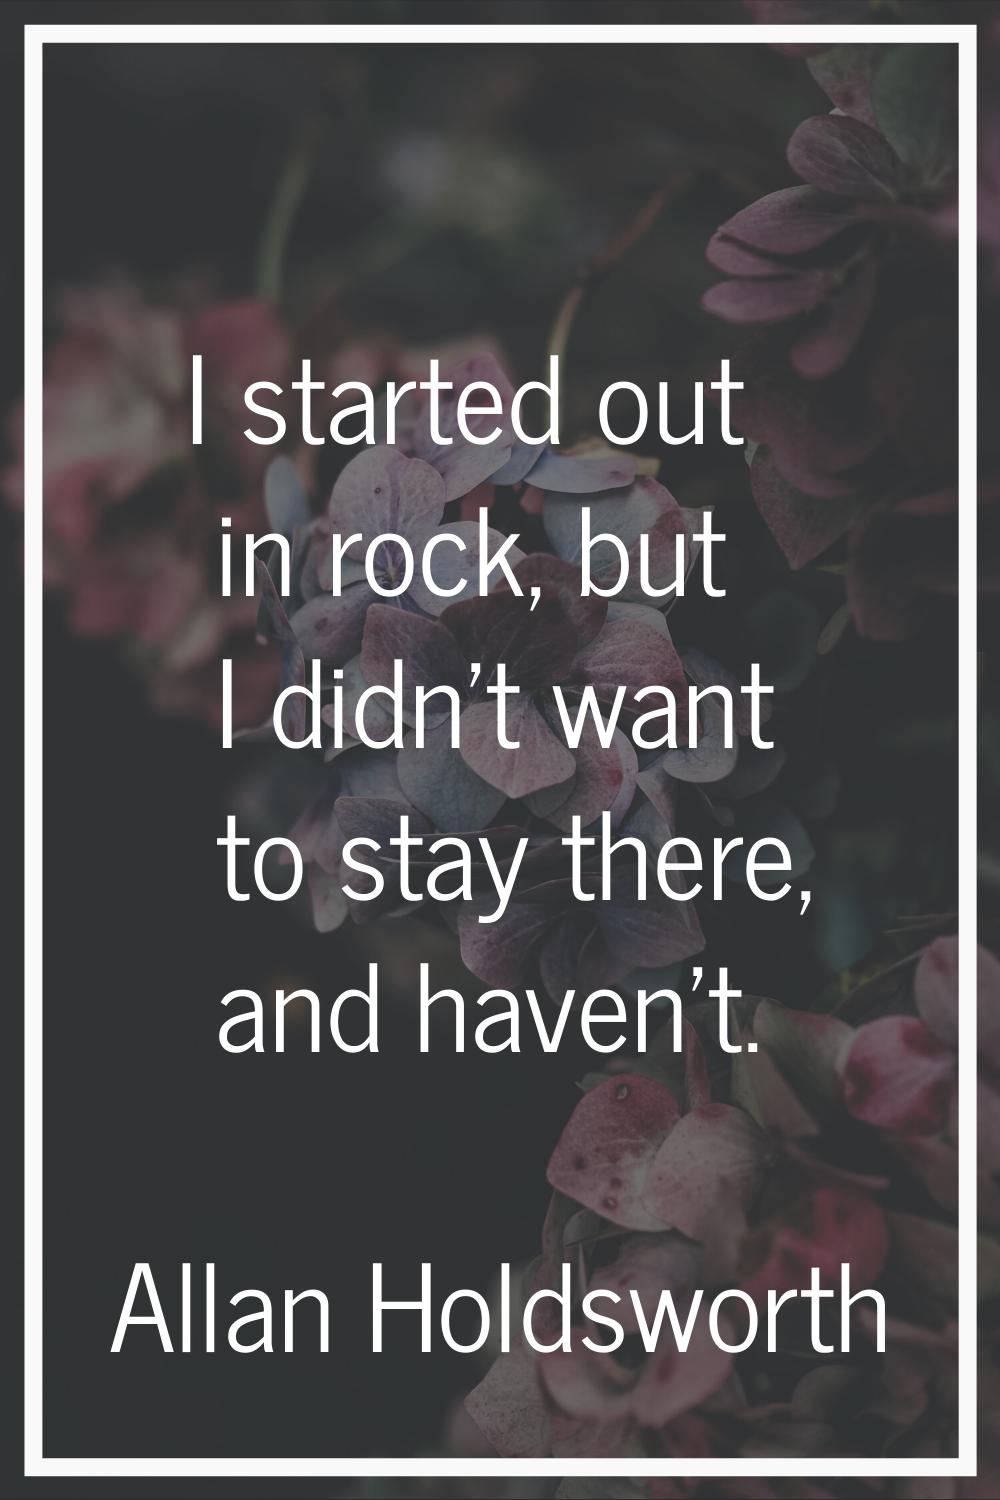 I started out in rock, but I didn't want to stay there, and haven't.